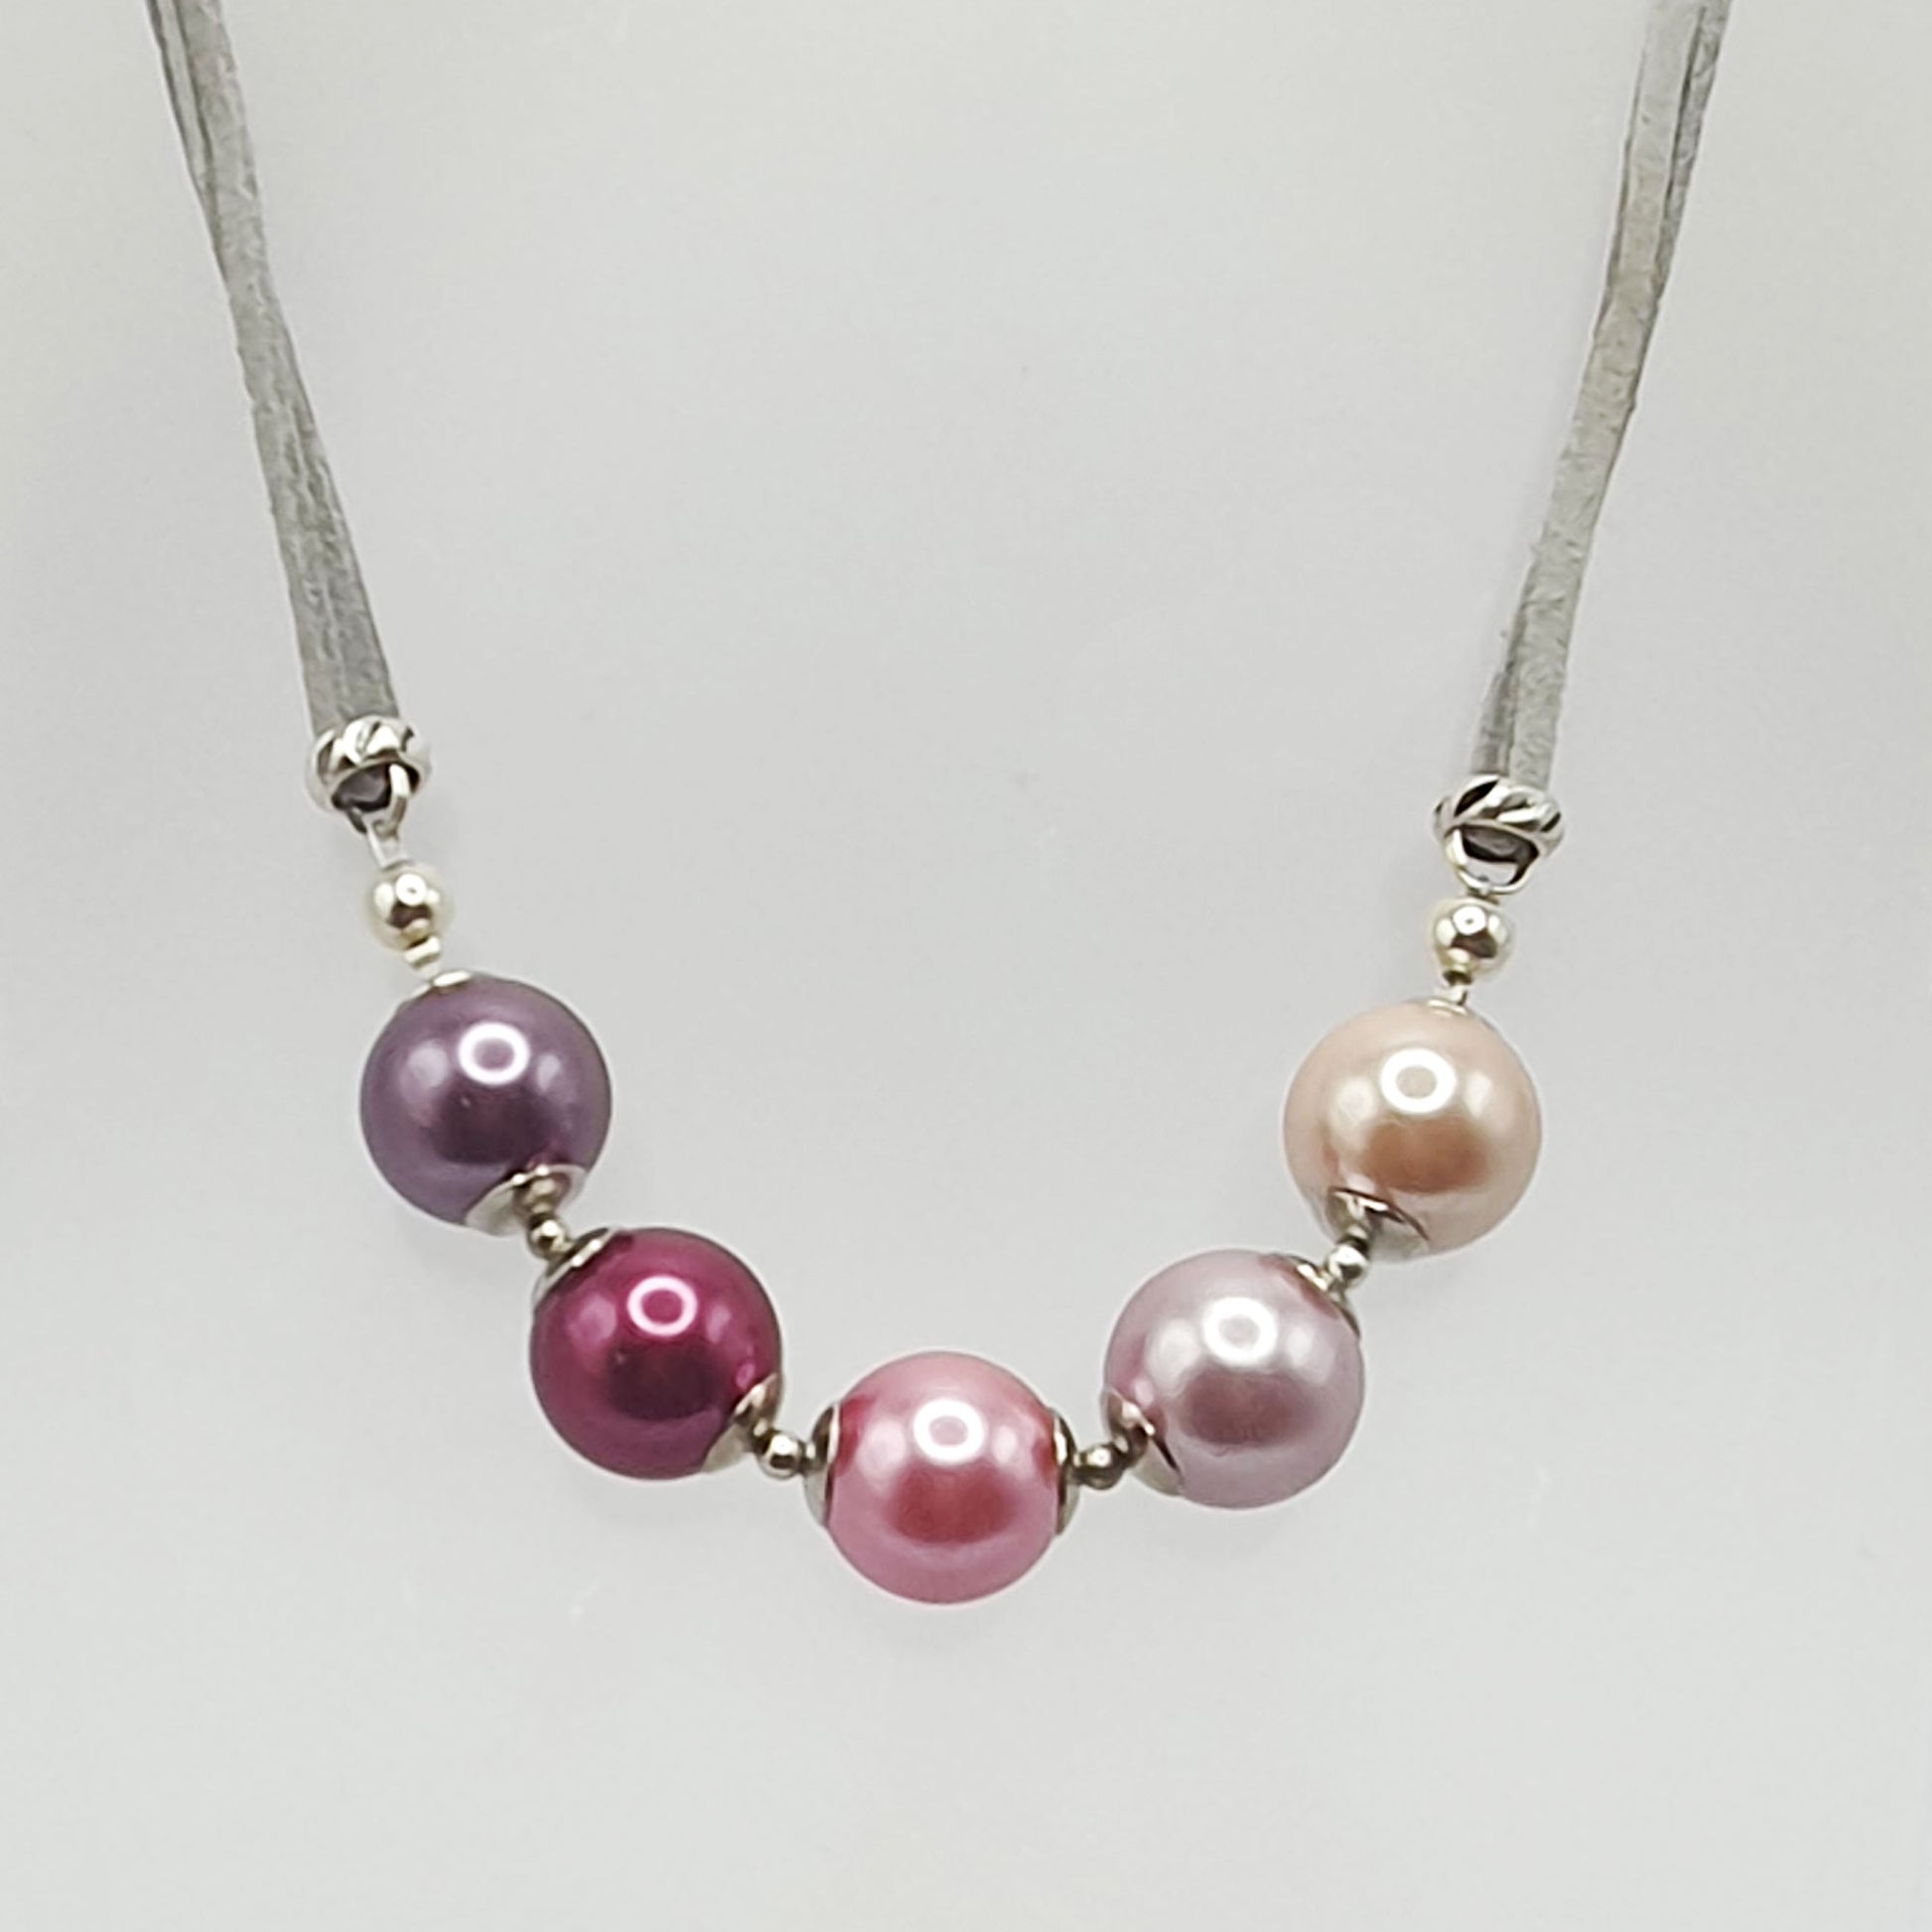 Glass pearl crescent necklace in pink tones